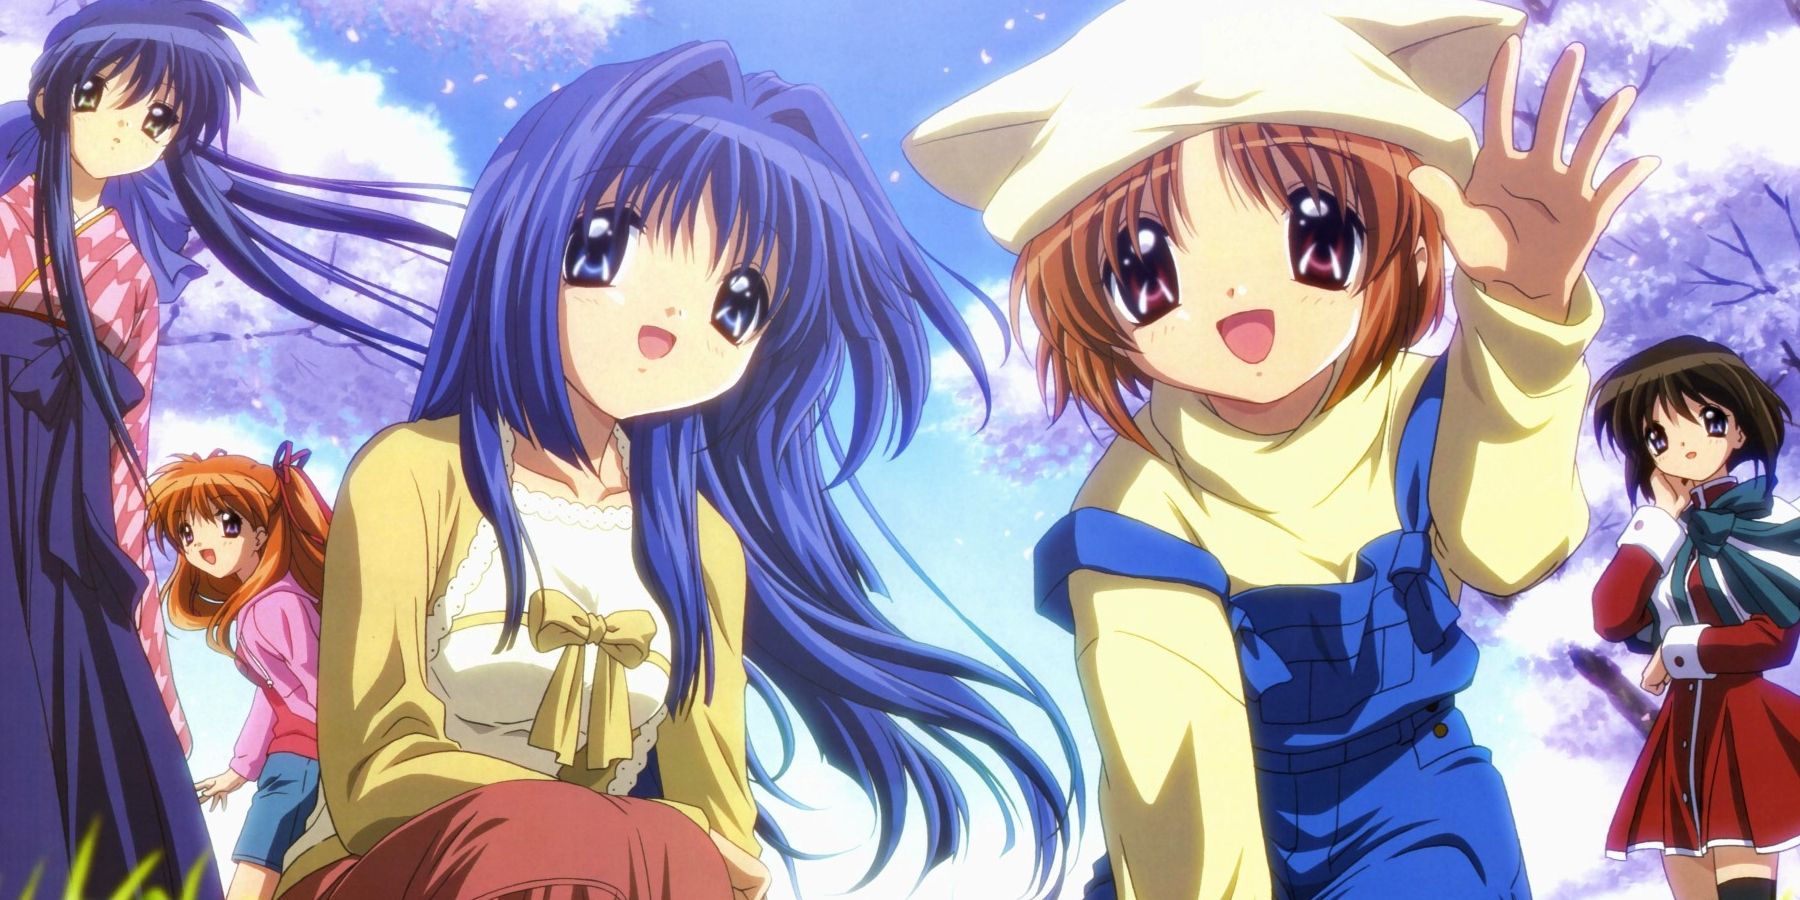 Character cast from Kanon anime